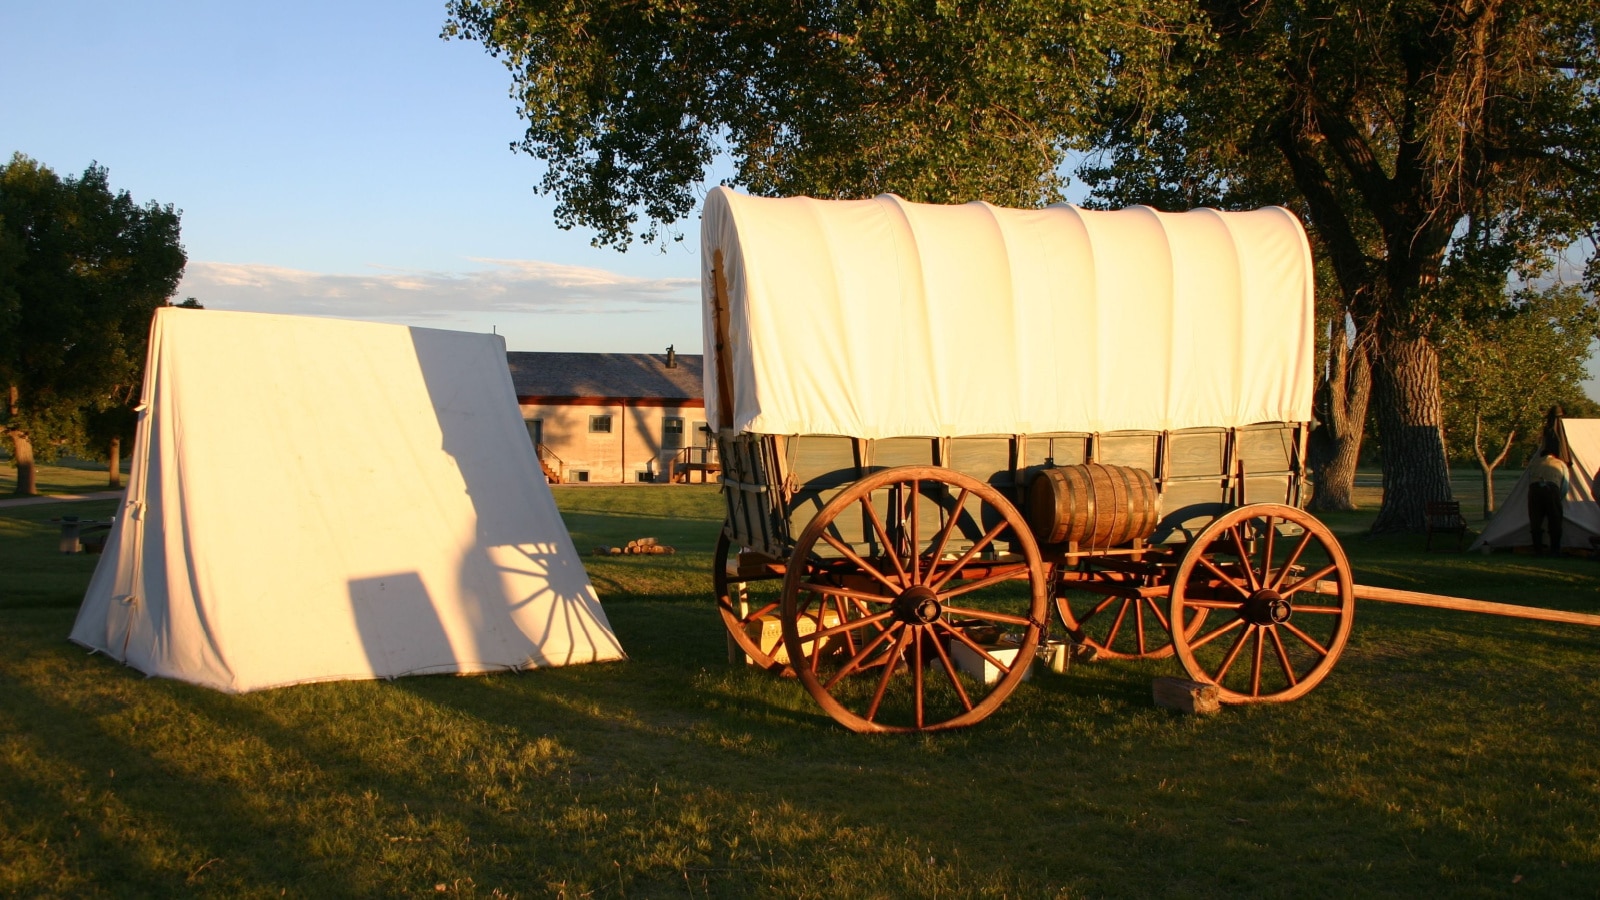 Fort Laramie National Historic Site Wyoming covered wagons set up to depict a pioneer campsite